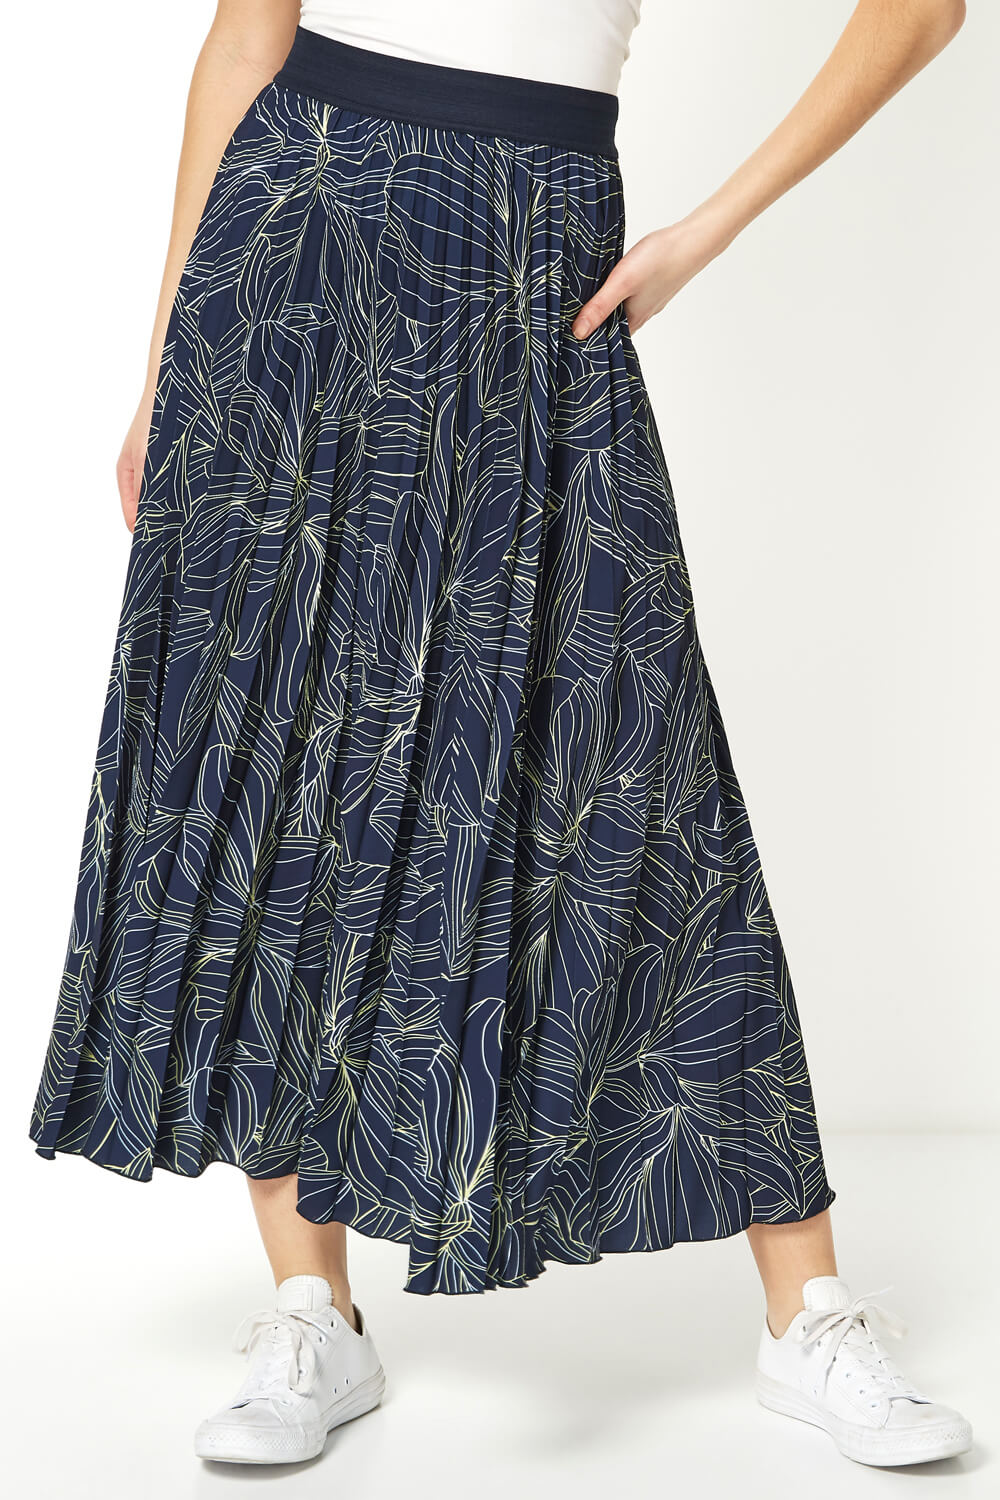 Navy  Linear Floral Print Pleated Midi Skirt, Image 2 of 5